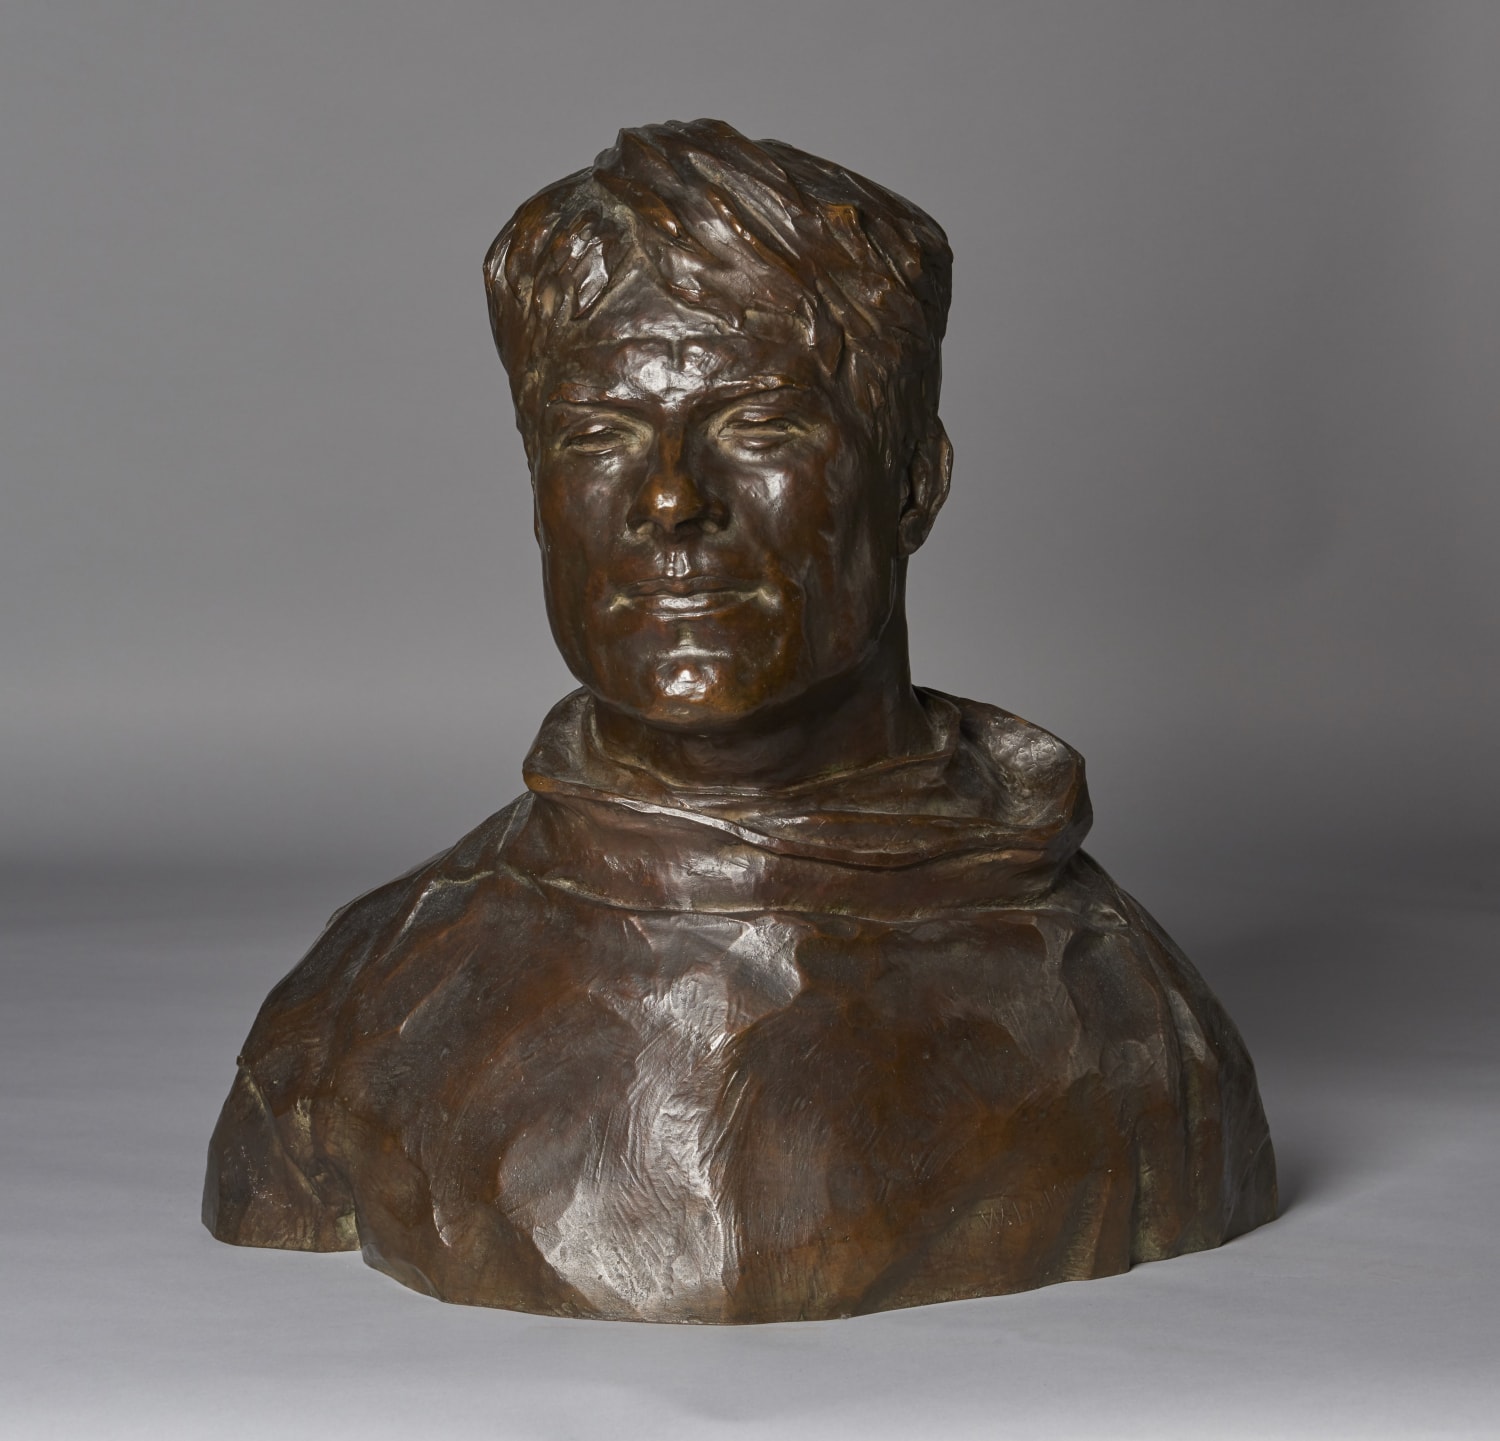 William Lamb ARSA (1898-1951) (cast by George Mancini (1904-89)), Young Fisherman  Bronze, around 1929, 51.5 x 67 x 39cm  Purchased by the RSA (1946) 2006.029